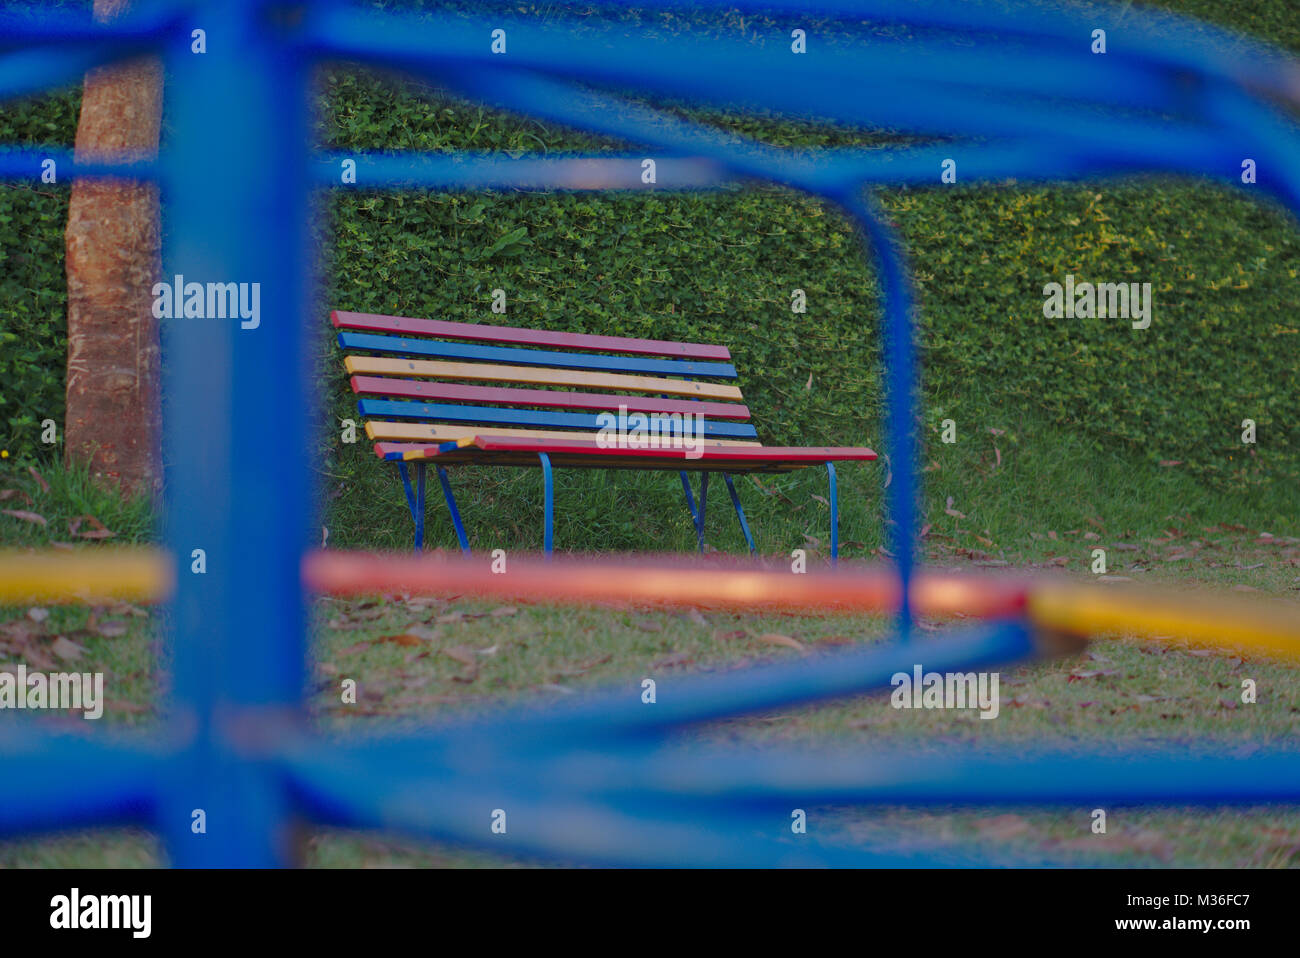 A colorful park bench shoot through a blue roundabout at a playground. Stock Photo